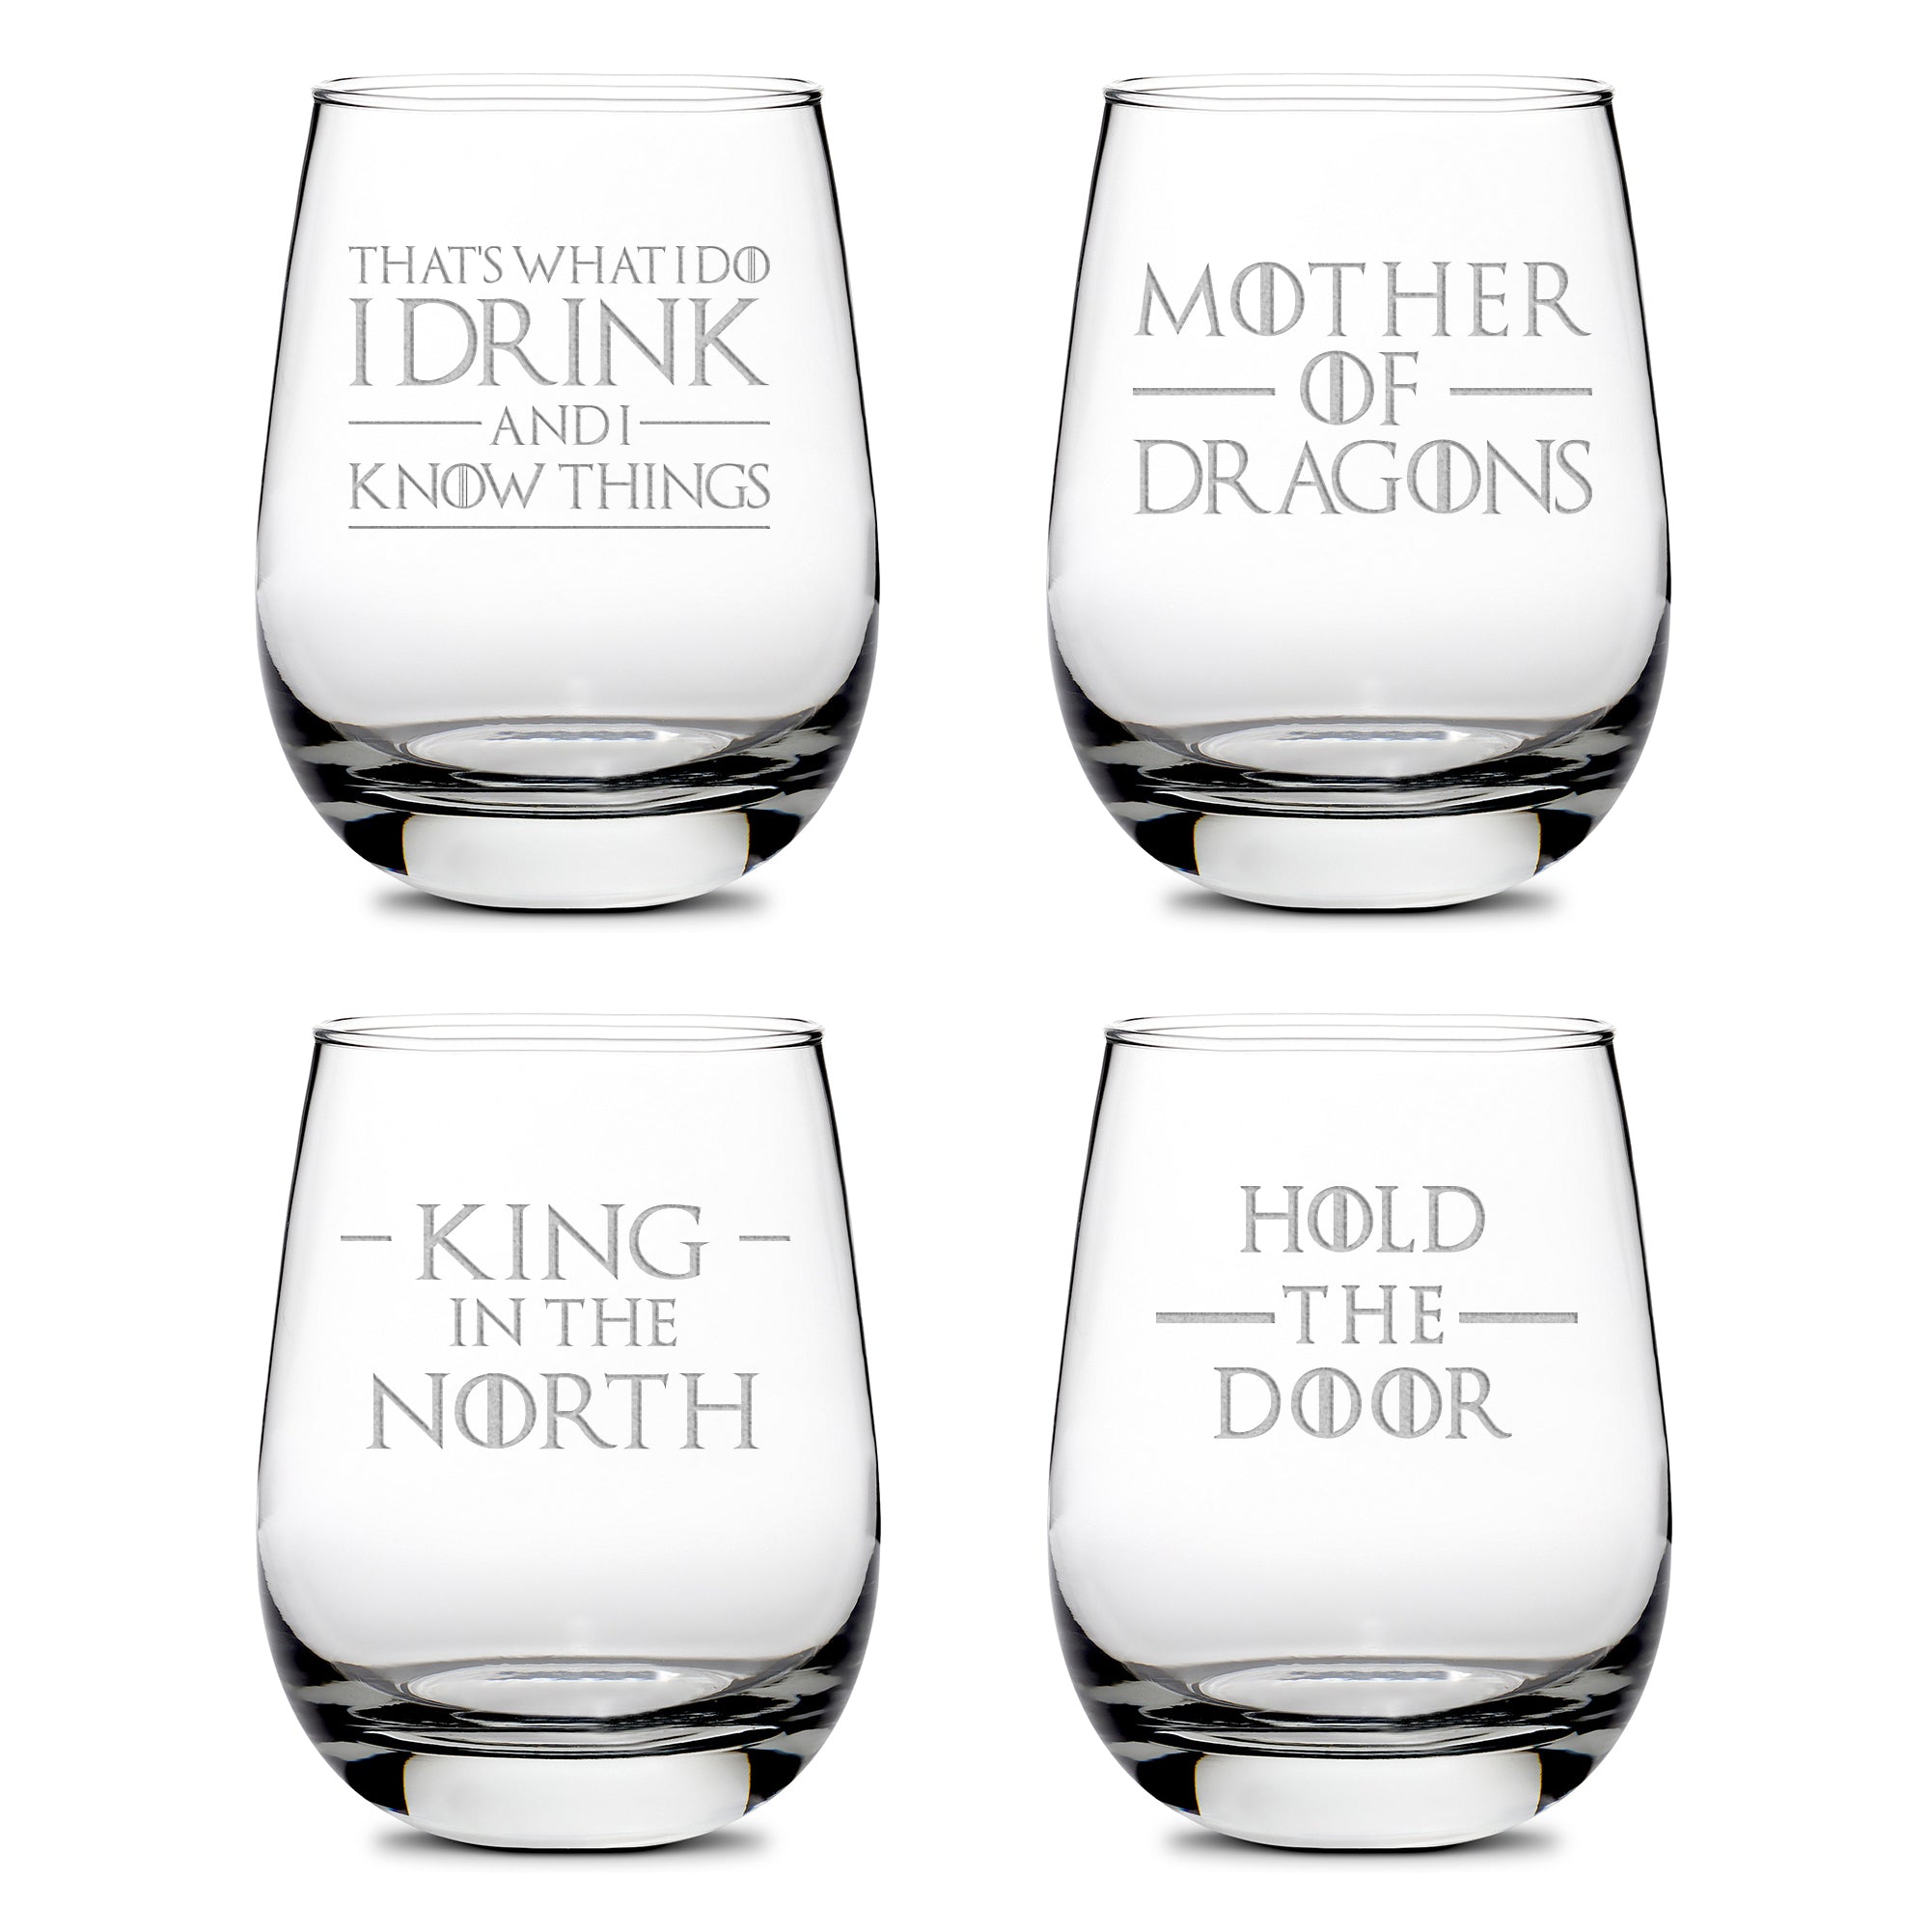 Premium Wine Glasses, Game of Thrones, I Drink and I Know Things, Mother of Dragons, King in the North, Hold the Door (Set of 4), Laser Etched or Hand Etched